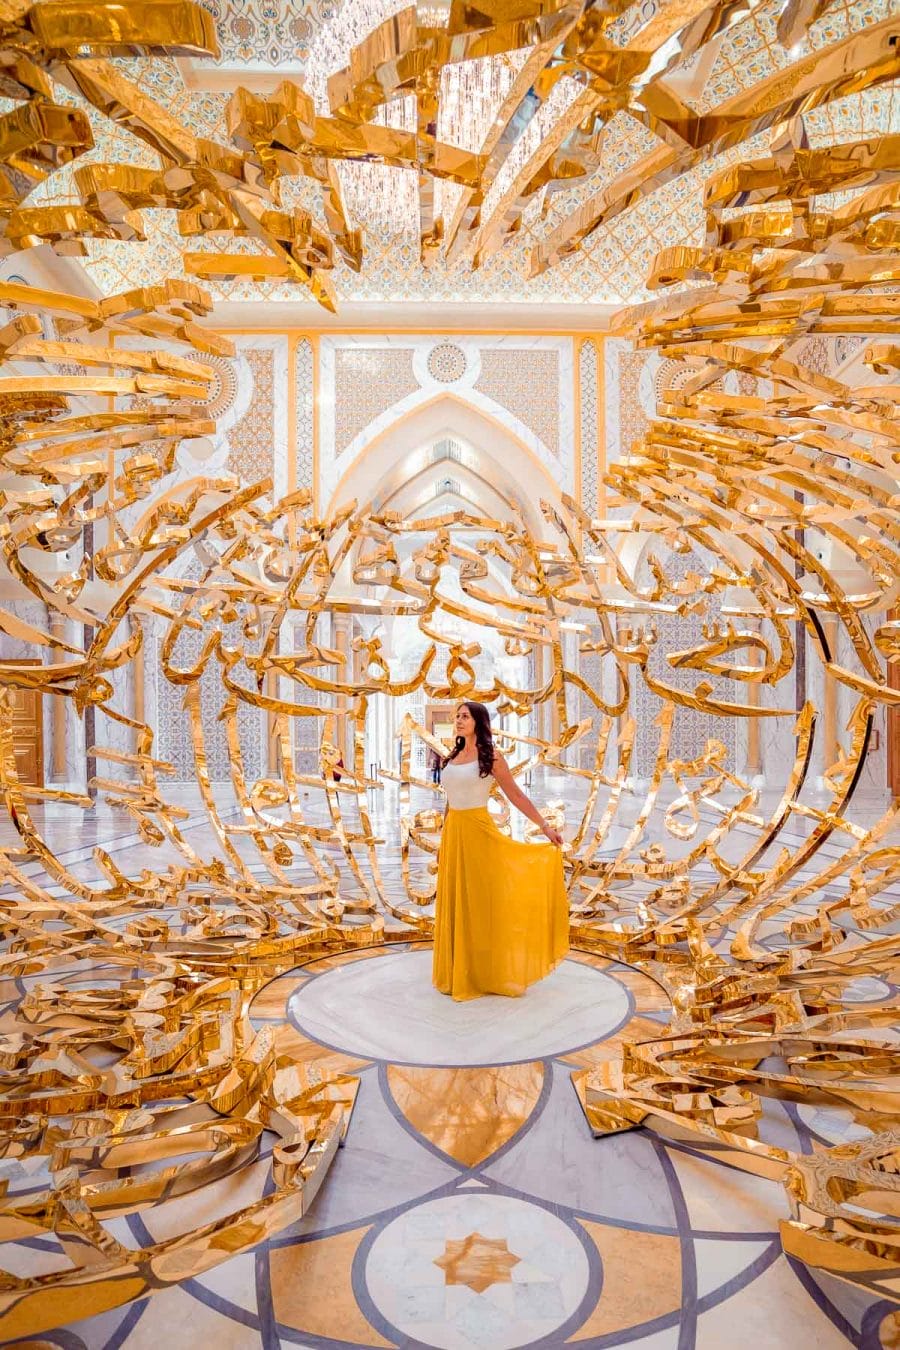 Girl in a yellow skirt standing in the middle of a golden structure in the Qasr Al Watan Palace Abu Dhabi